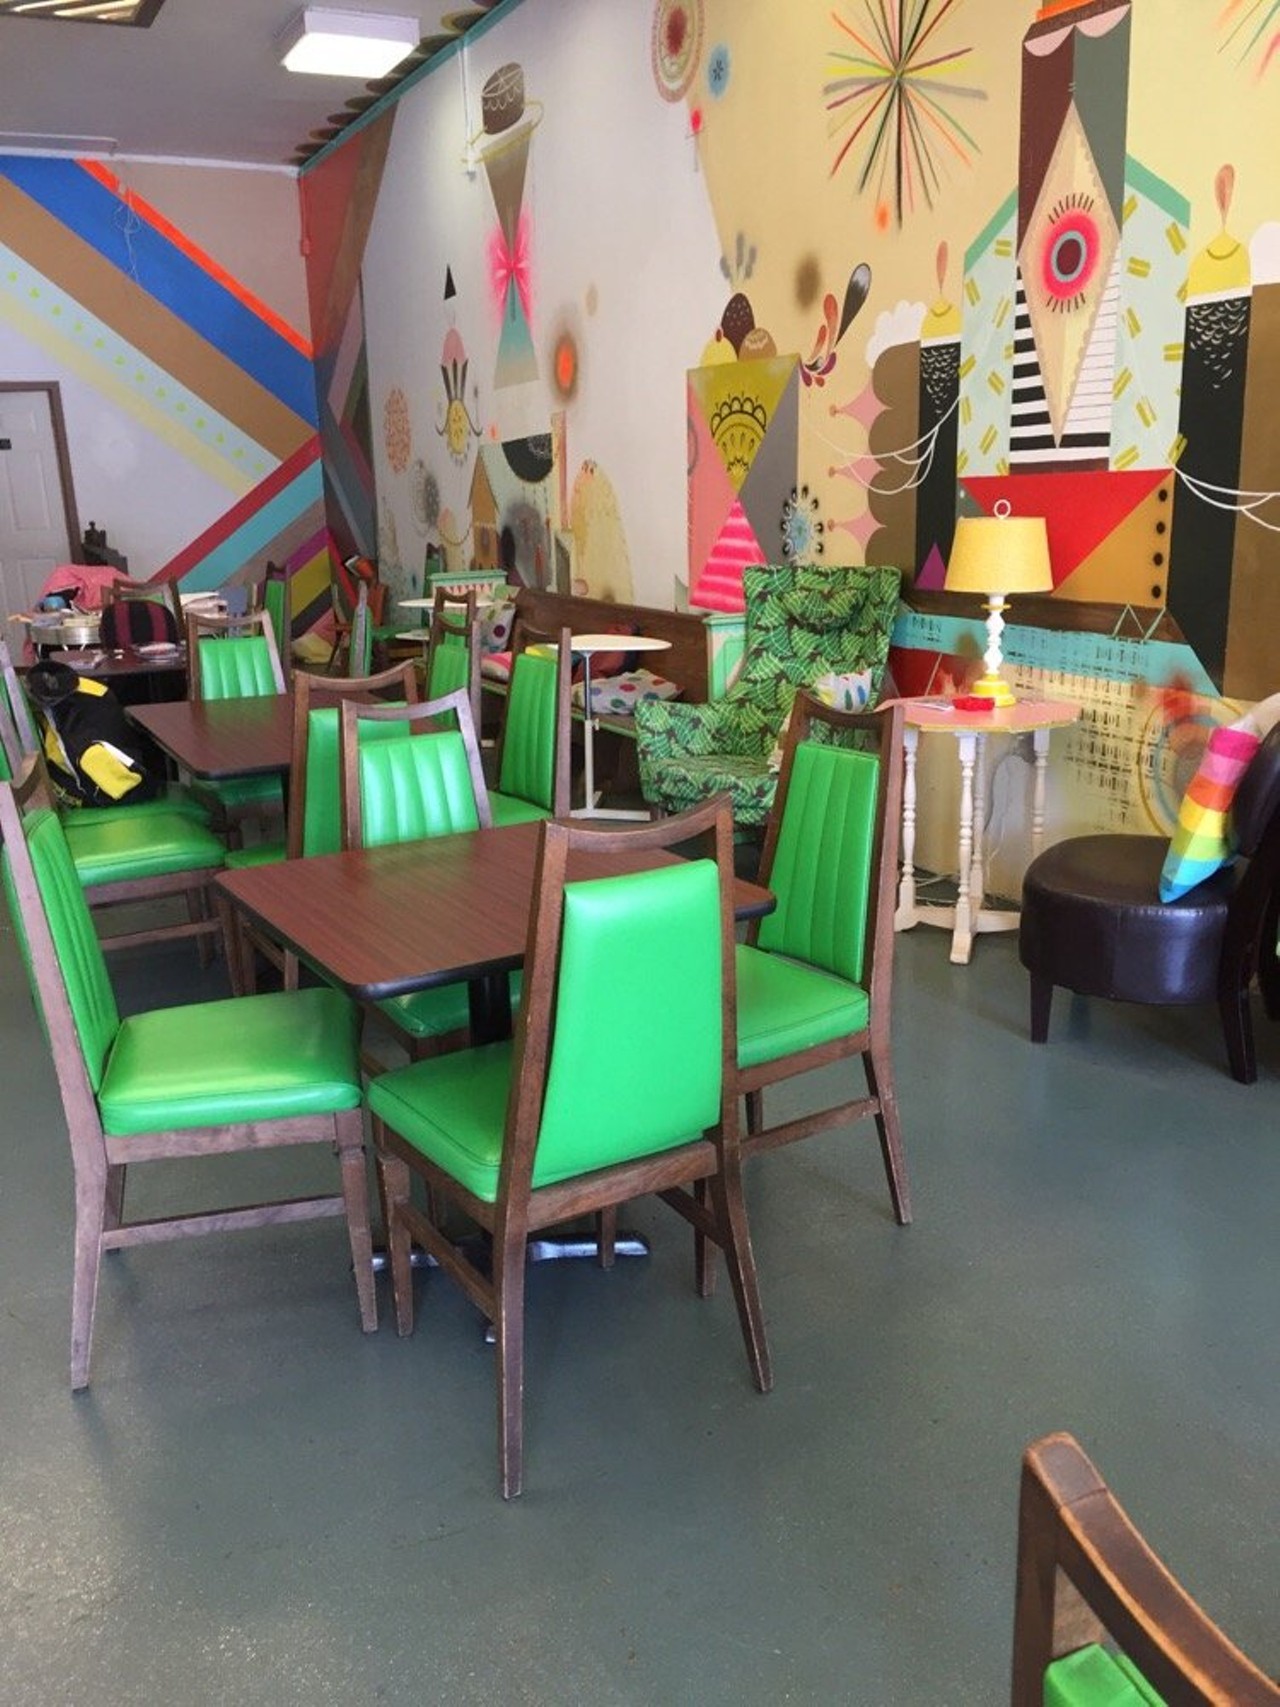 Good Cakes and Bakes, 19363 Livernois Ave. Walk into this bakery (which sits on the same block as Kuzzo's) and you're transported to a children's wonderland, with bright, splashy decor and a smiling greeting from owner April Anderson, who's baked delights focus on local, organic ingredients. (Photo by Yelp user Max M.)